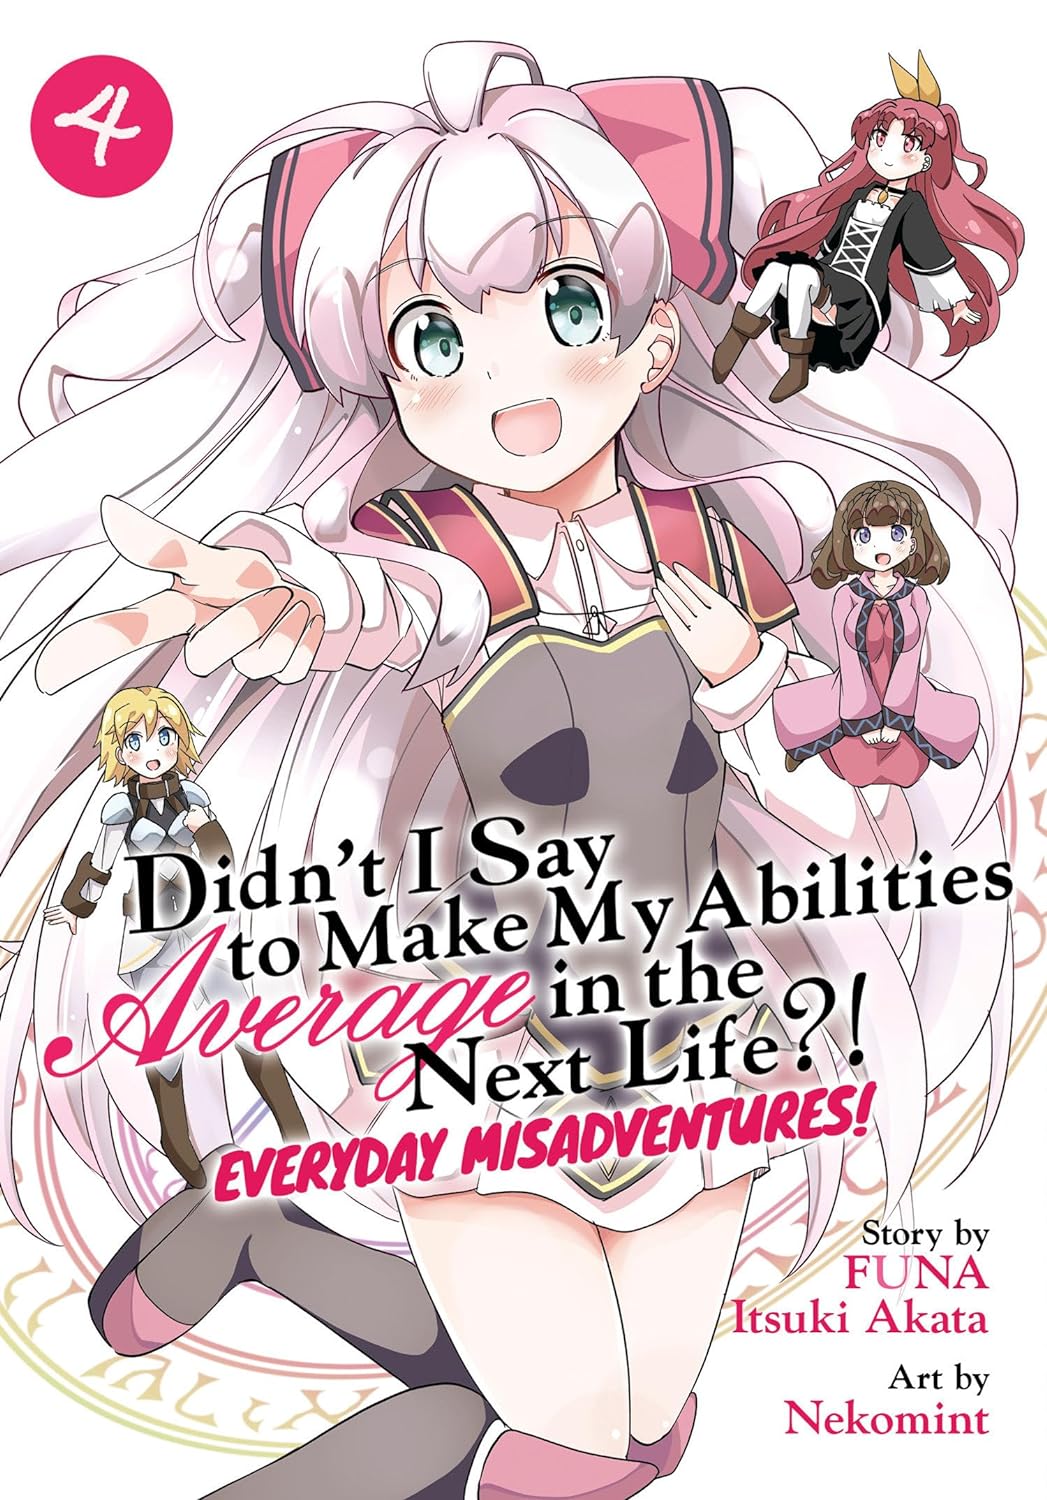 (30/01/2024) Didn't I Say to Make My Abilities Average in the Next Life?! Everyday Misadventures! (Manga) Vol. 04